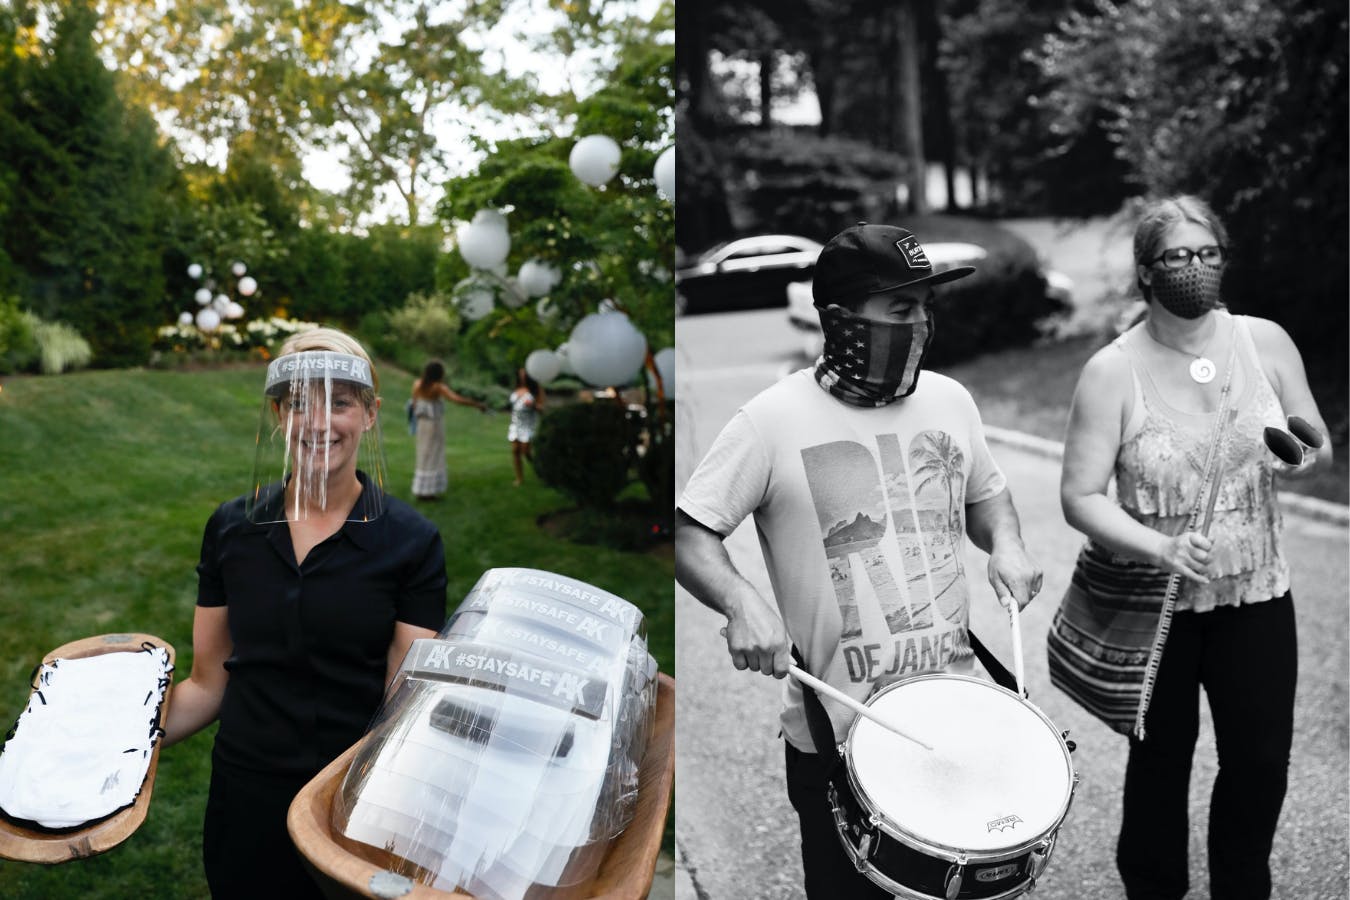 Socially Distanced Backyard Birthday Party With Masked Staff and Entertainment | PartySlate